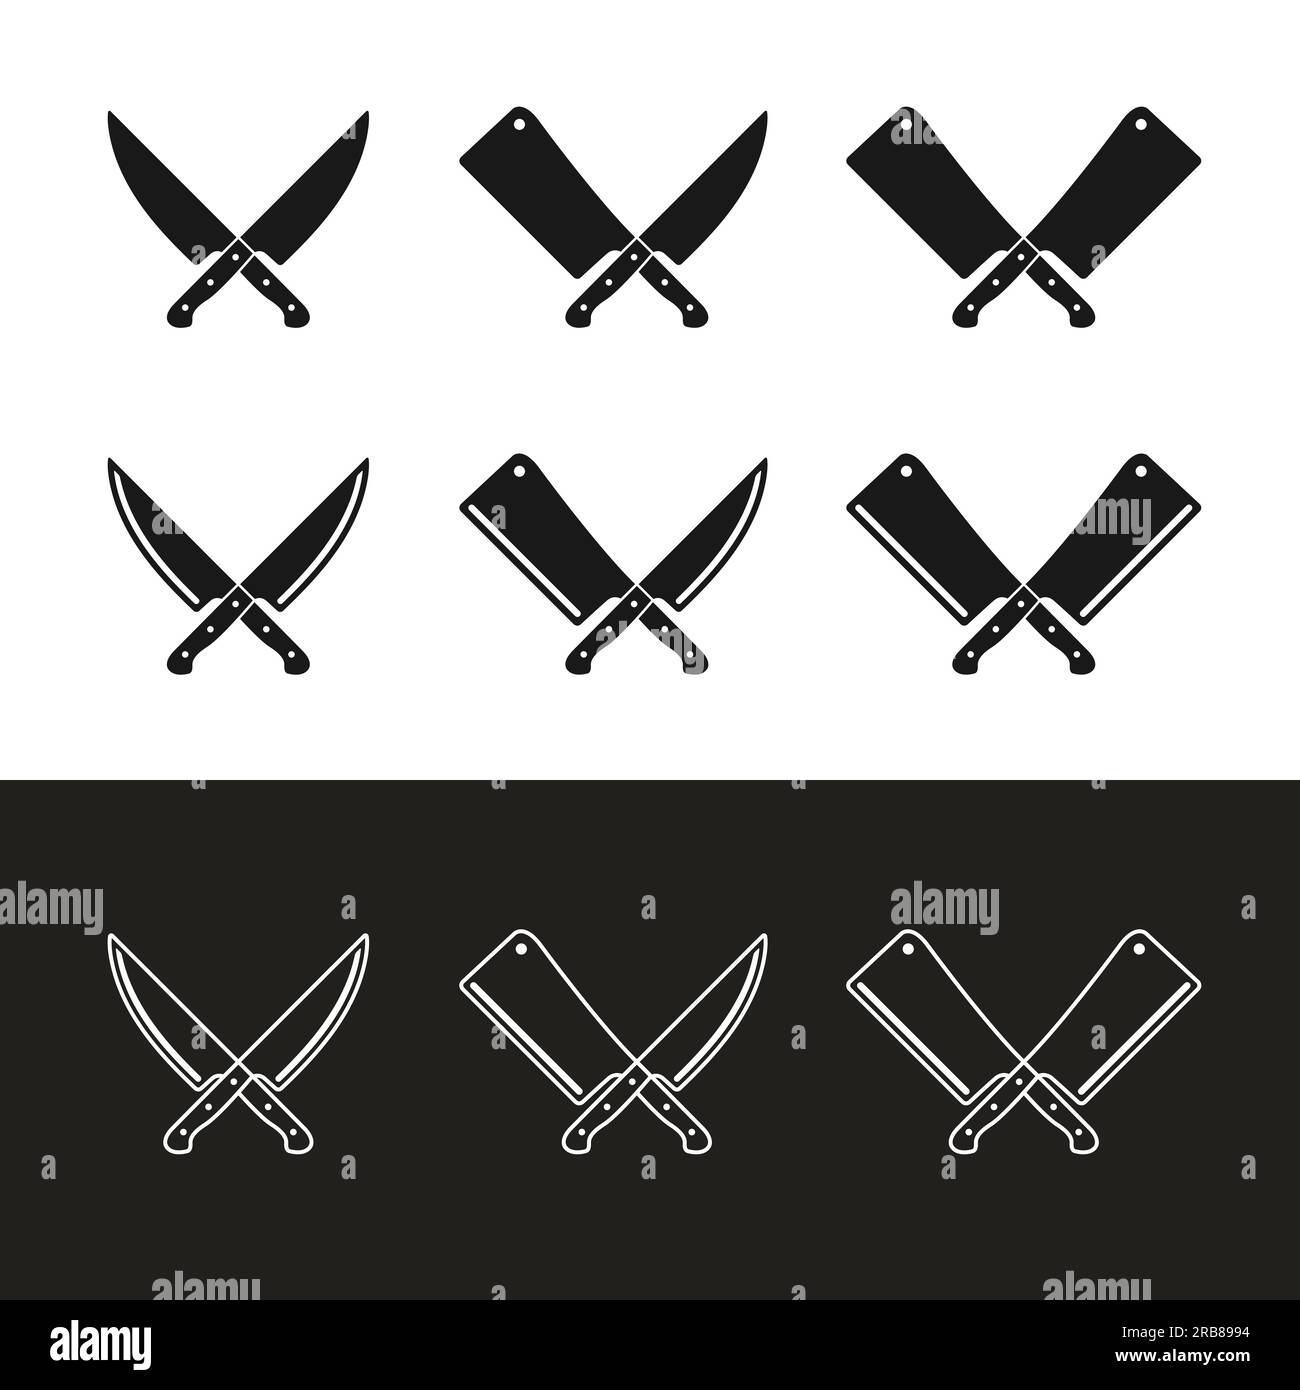 https://c8.alamy.com/comp/2RB8994/set-of-crossed-butcher-chef-meat-knives-knife-cleaver-silhouette-in-retro-vintage-hipster-for-adventure-hunting-butchery-deli-restaurant-business-2RB8994.jpg